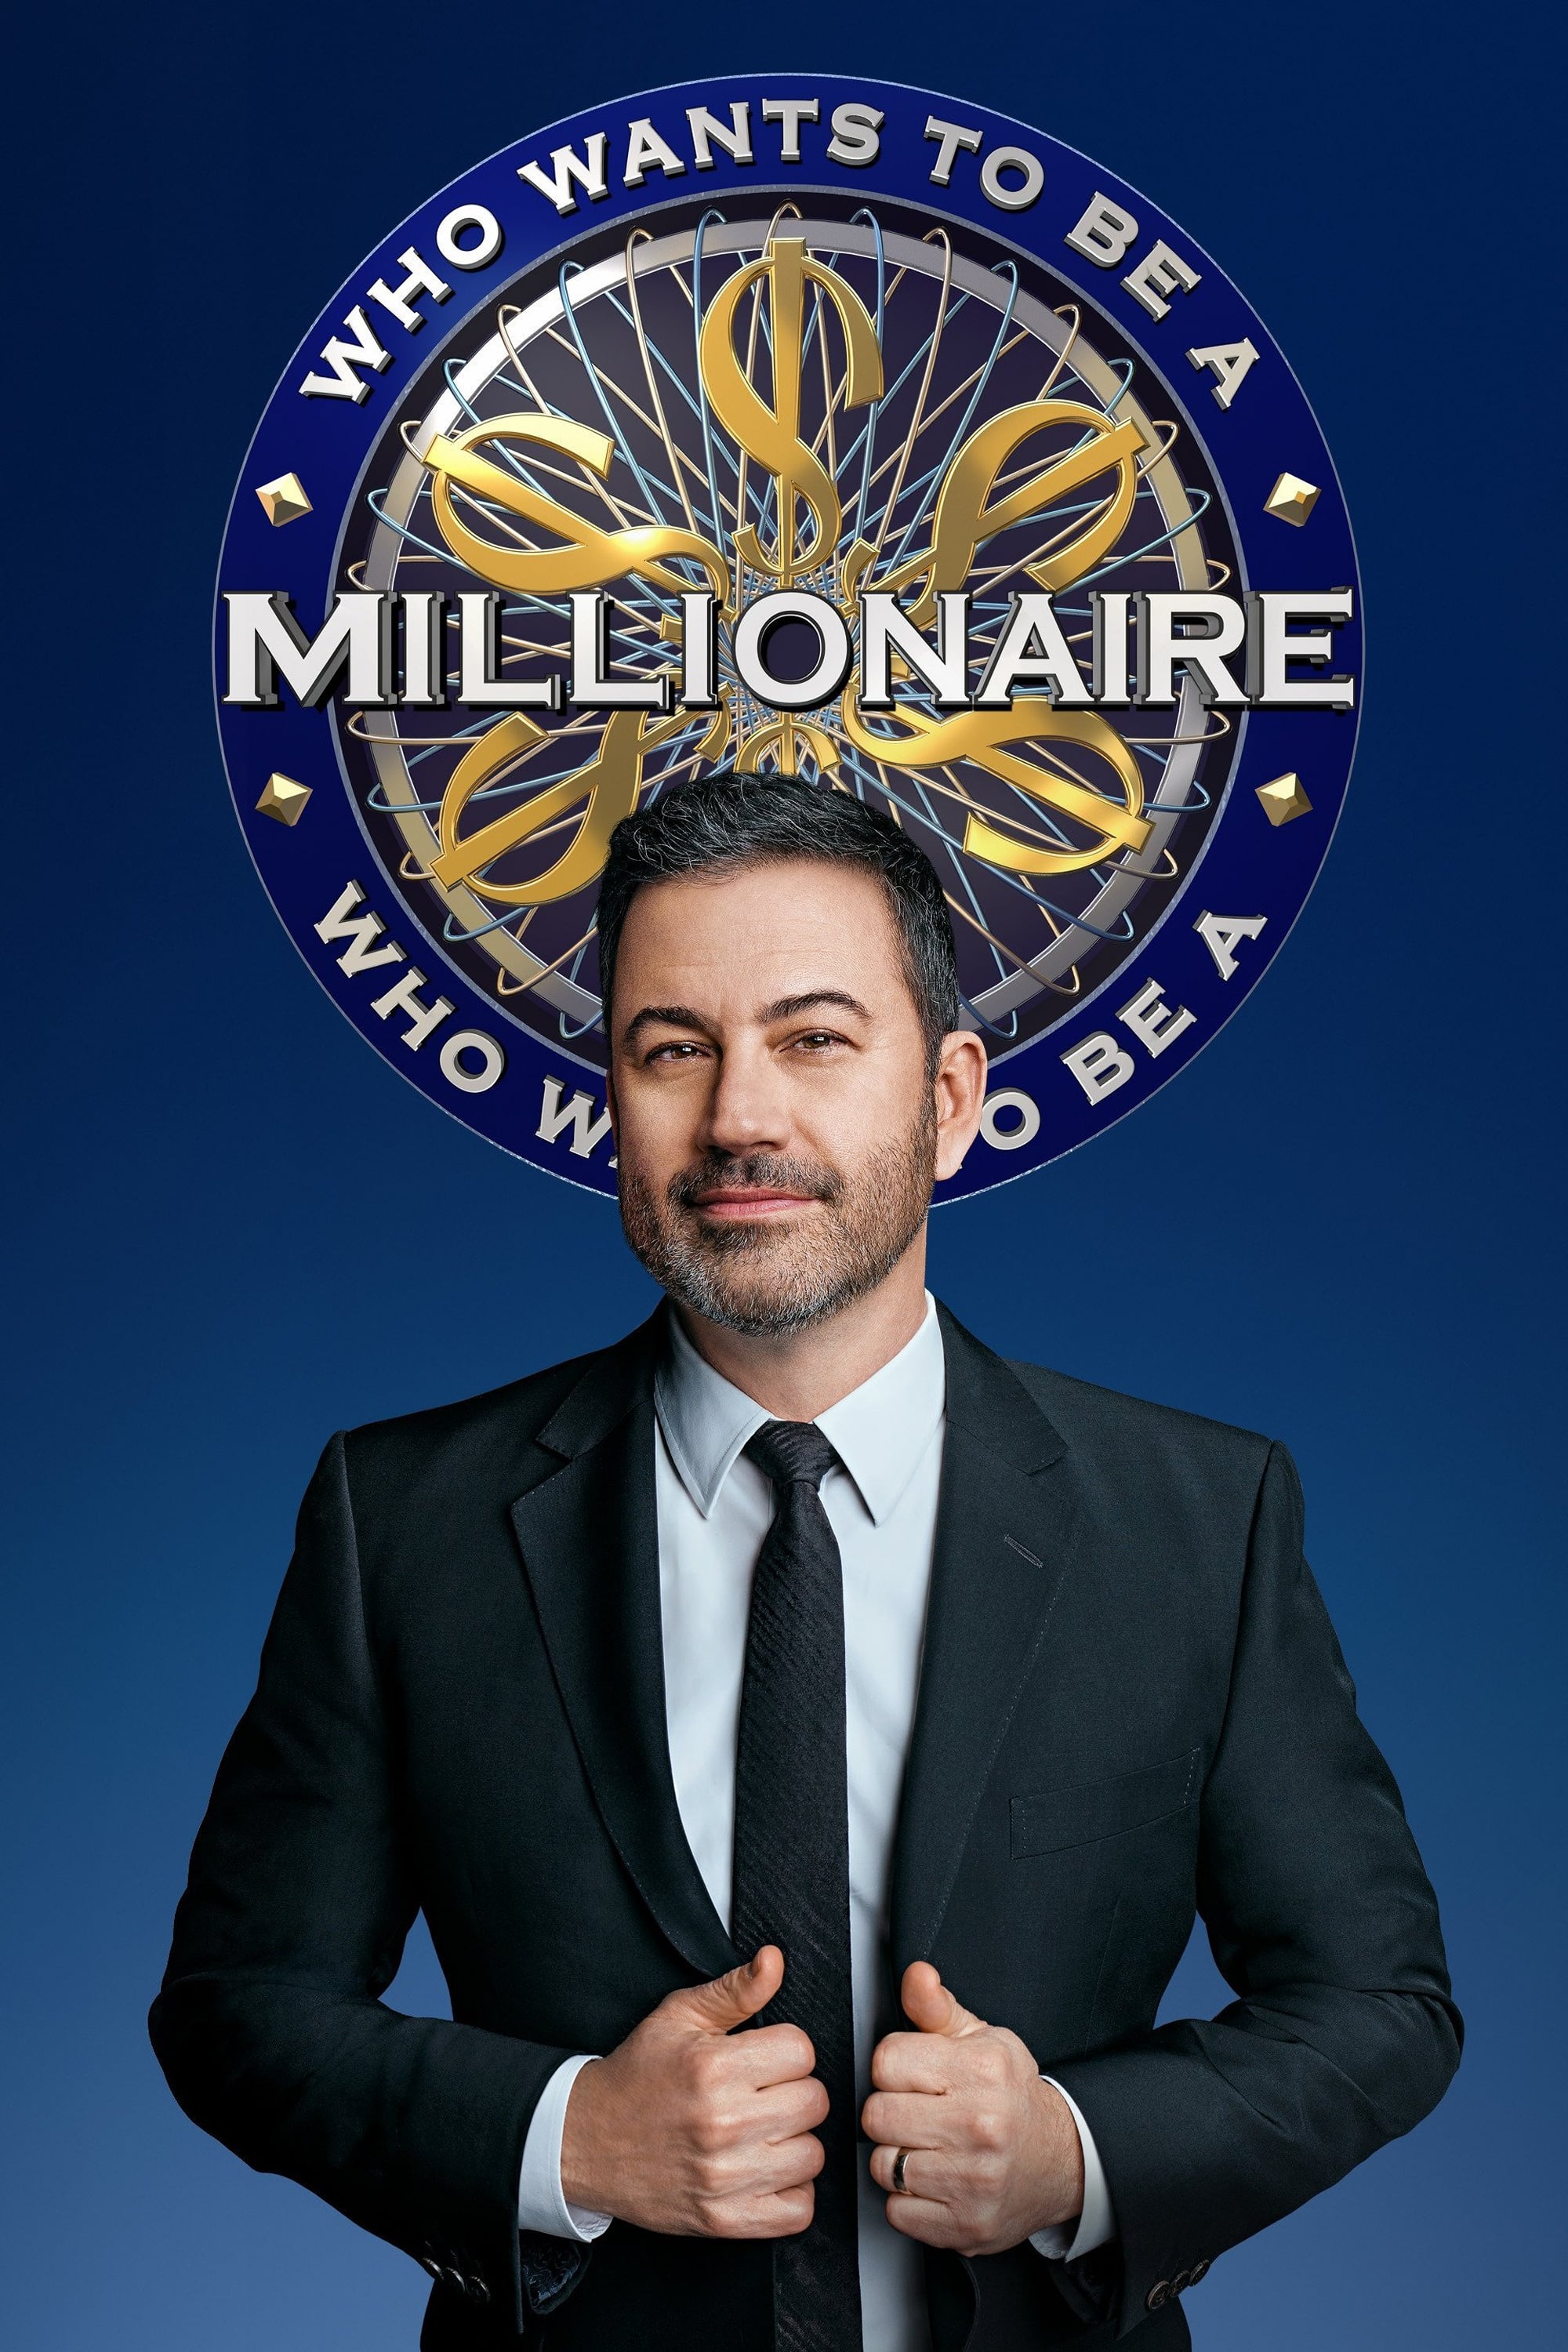 Who Wants to Be a Millionaire poster